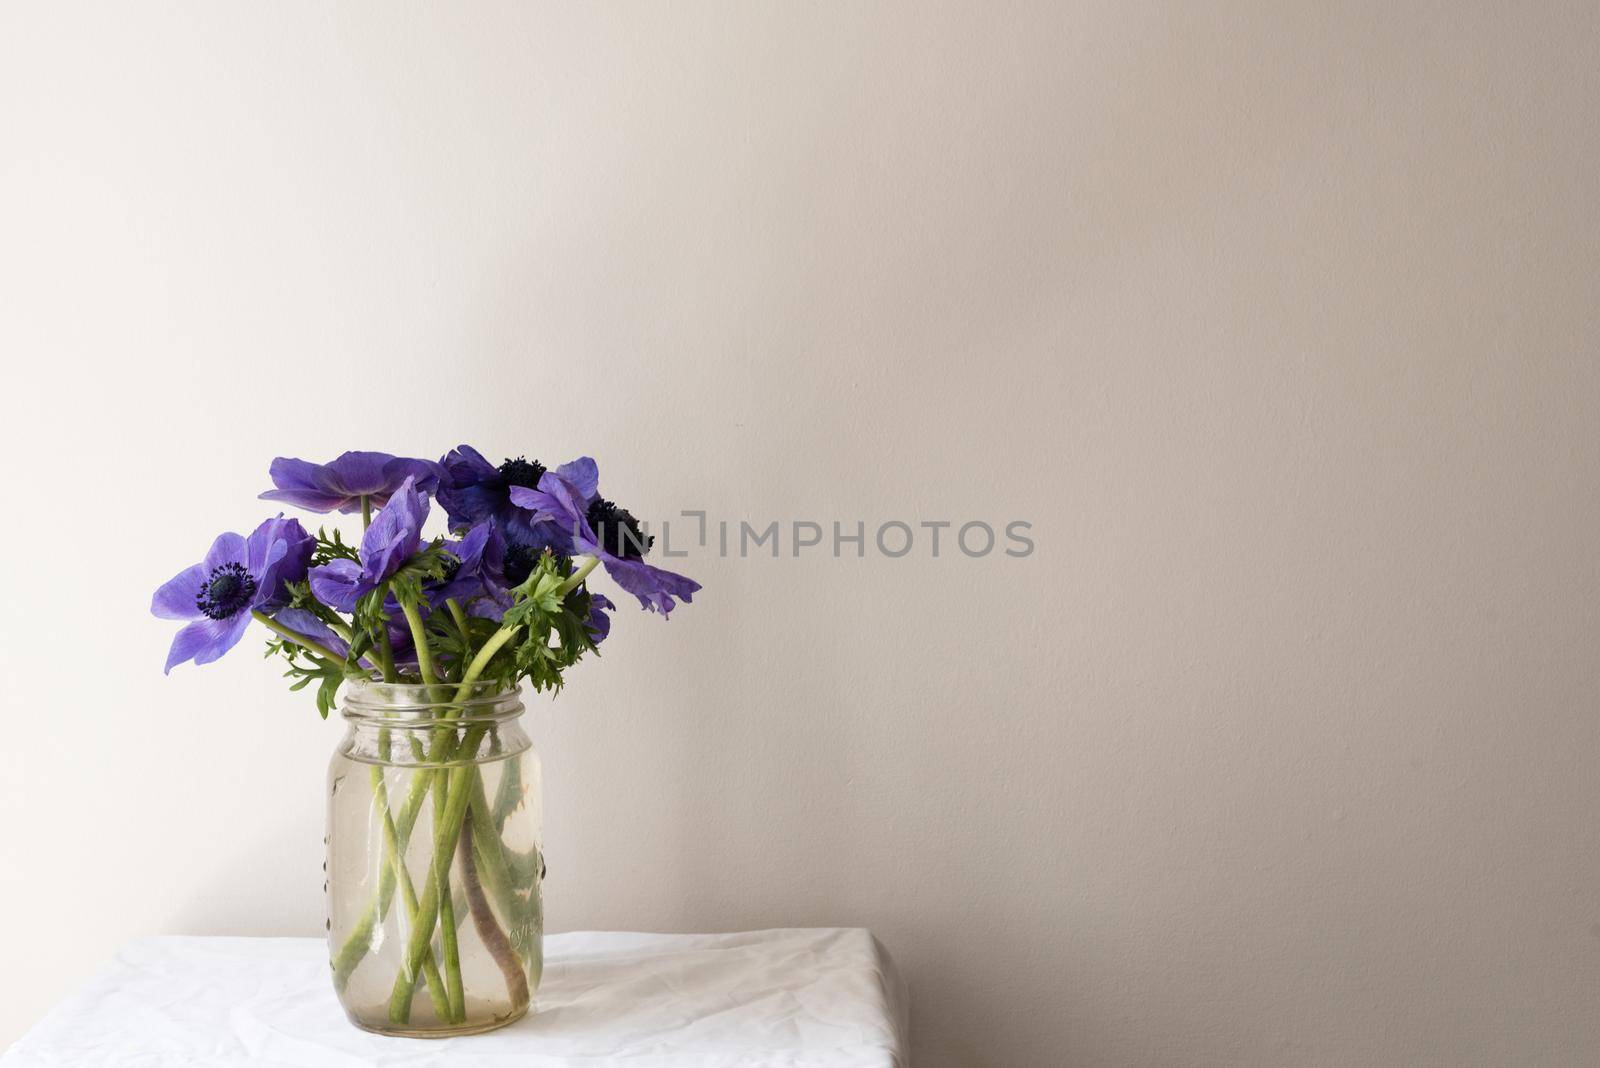 Purple anemone flowers in a glass jar on a small white table against neutral wall